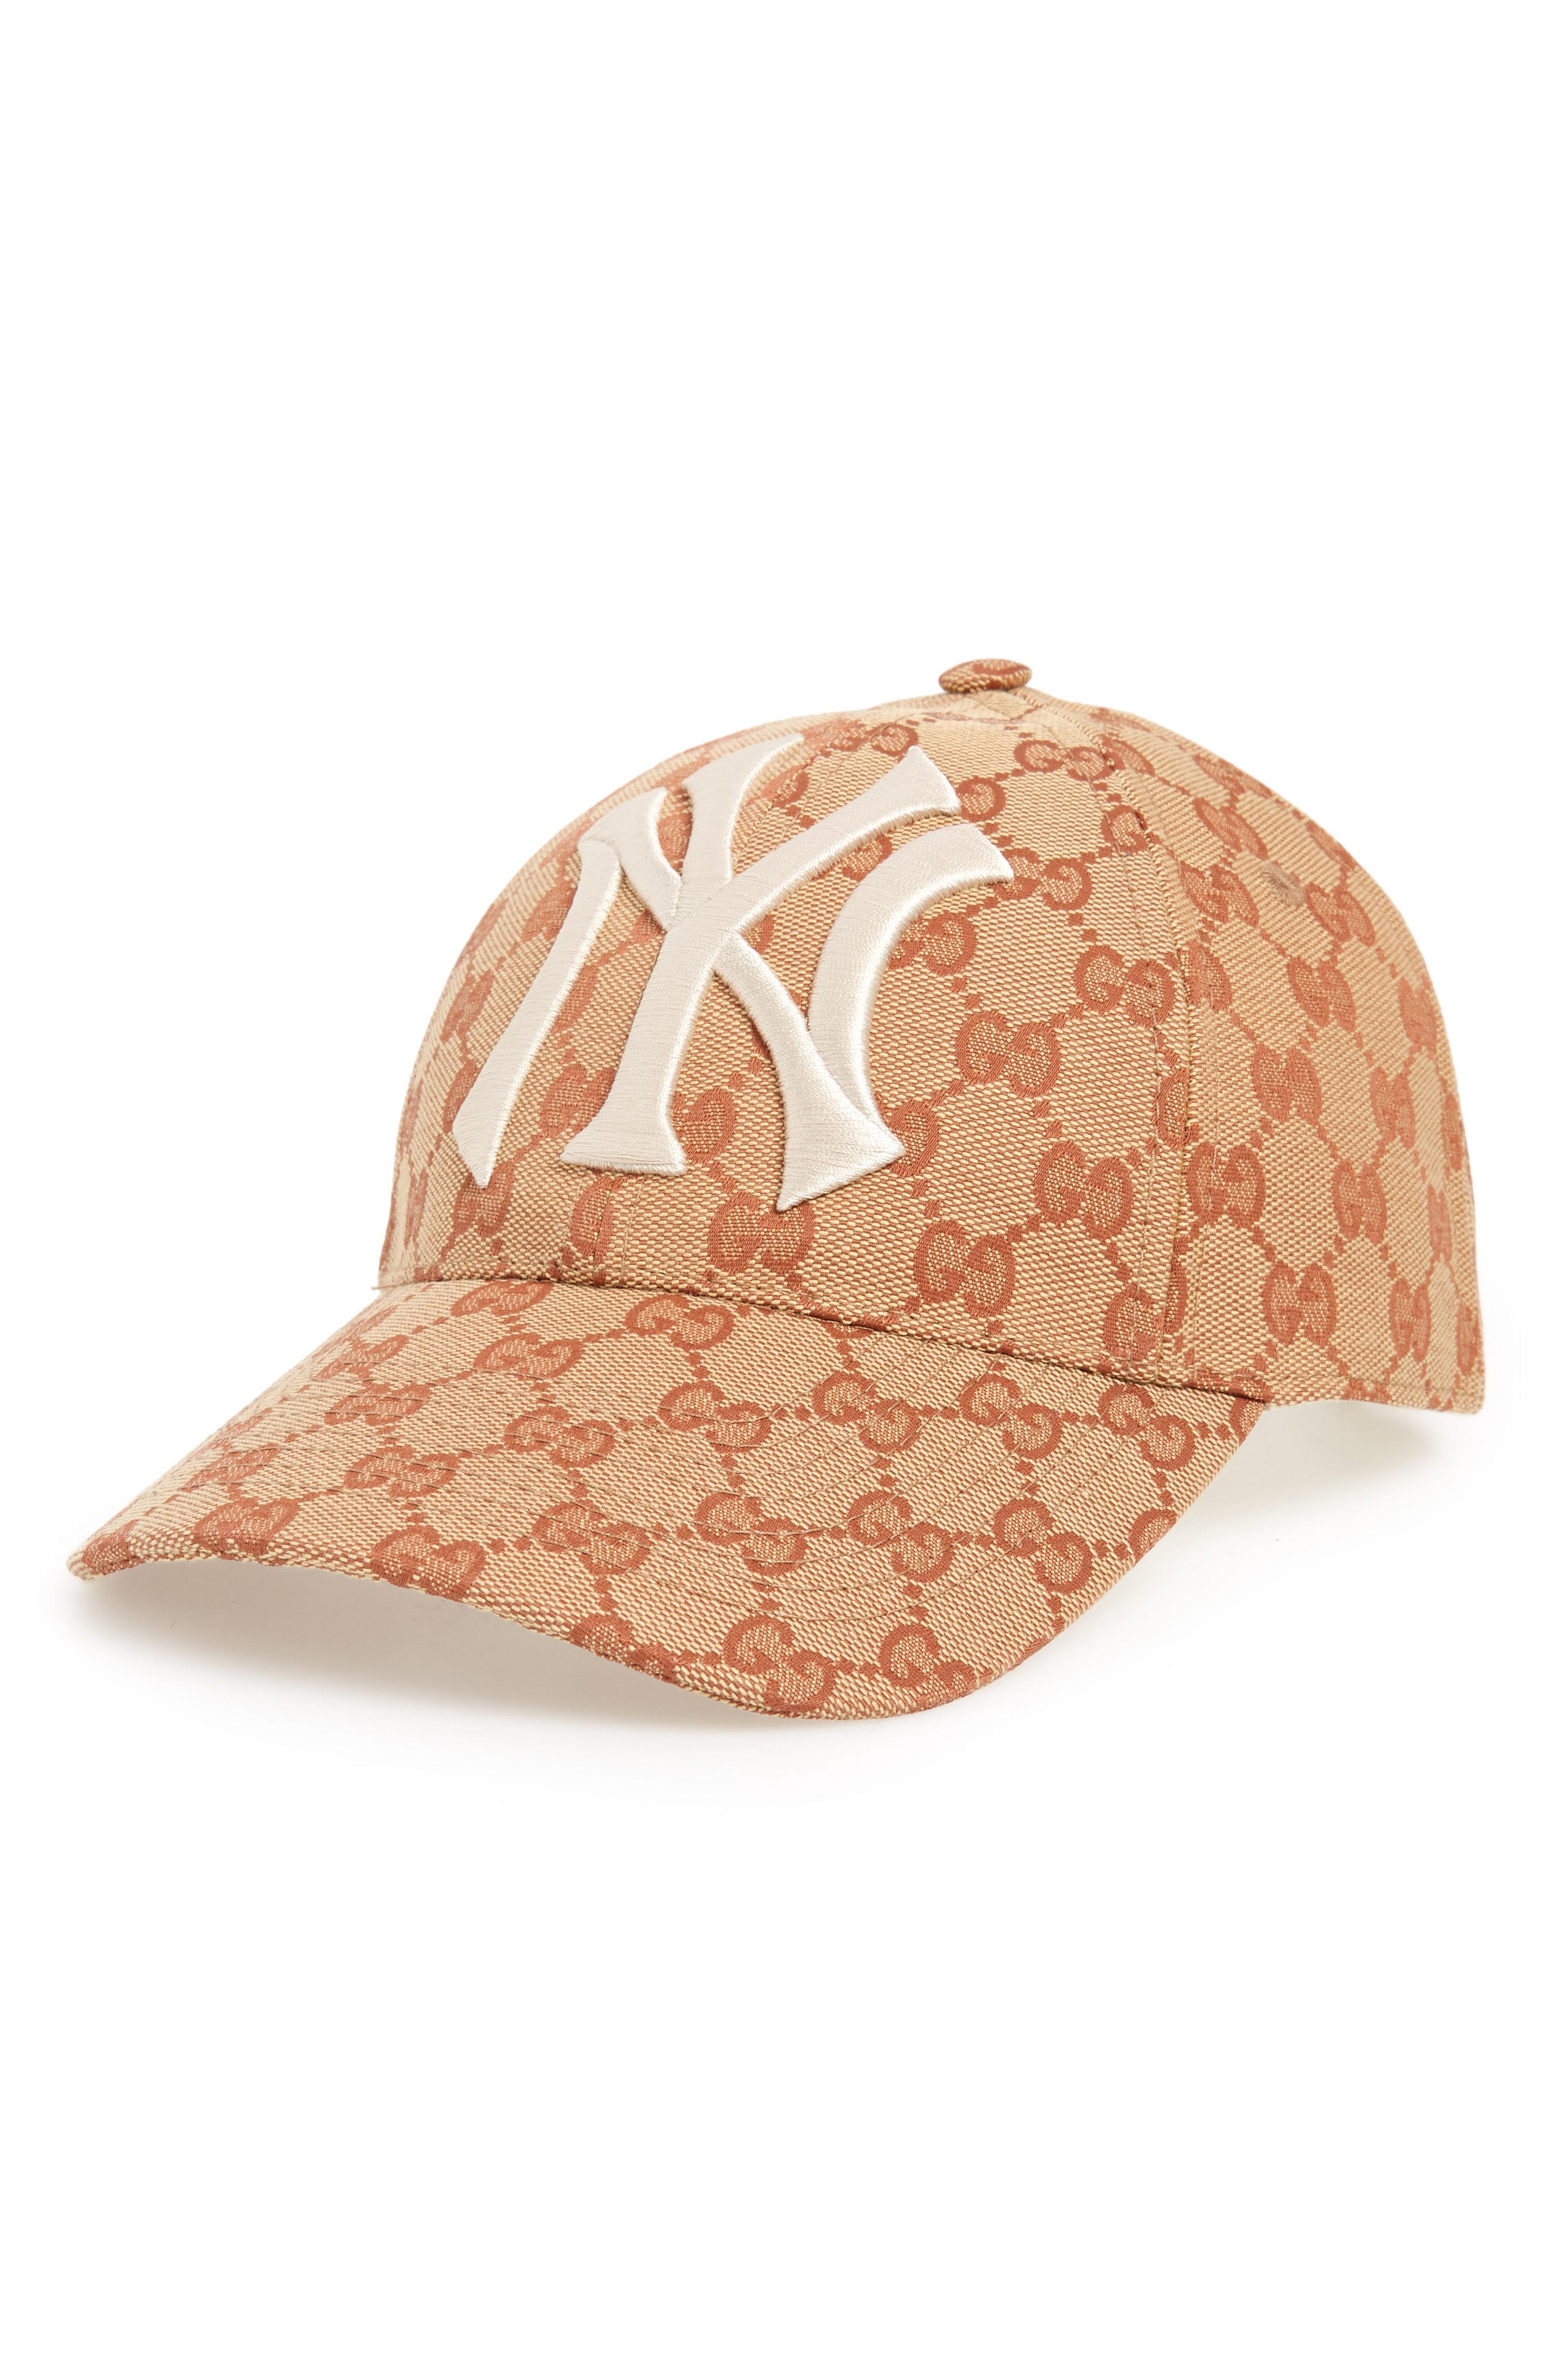 ny yankees gucci hat, OFF 78%,www 